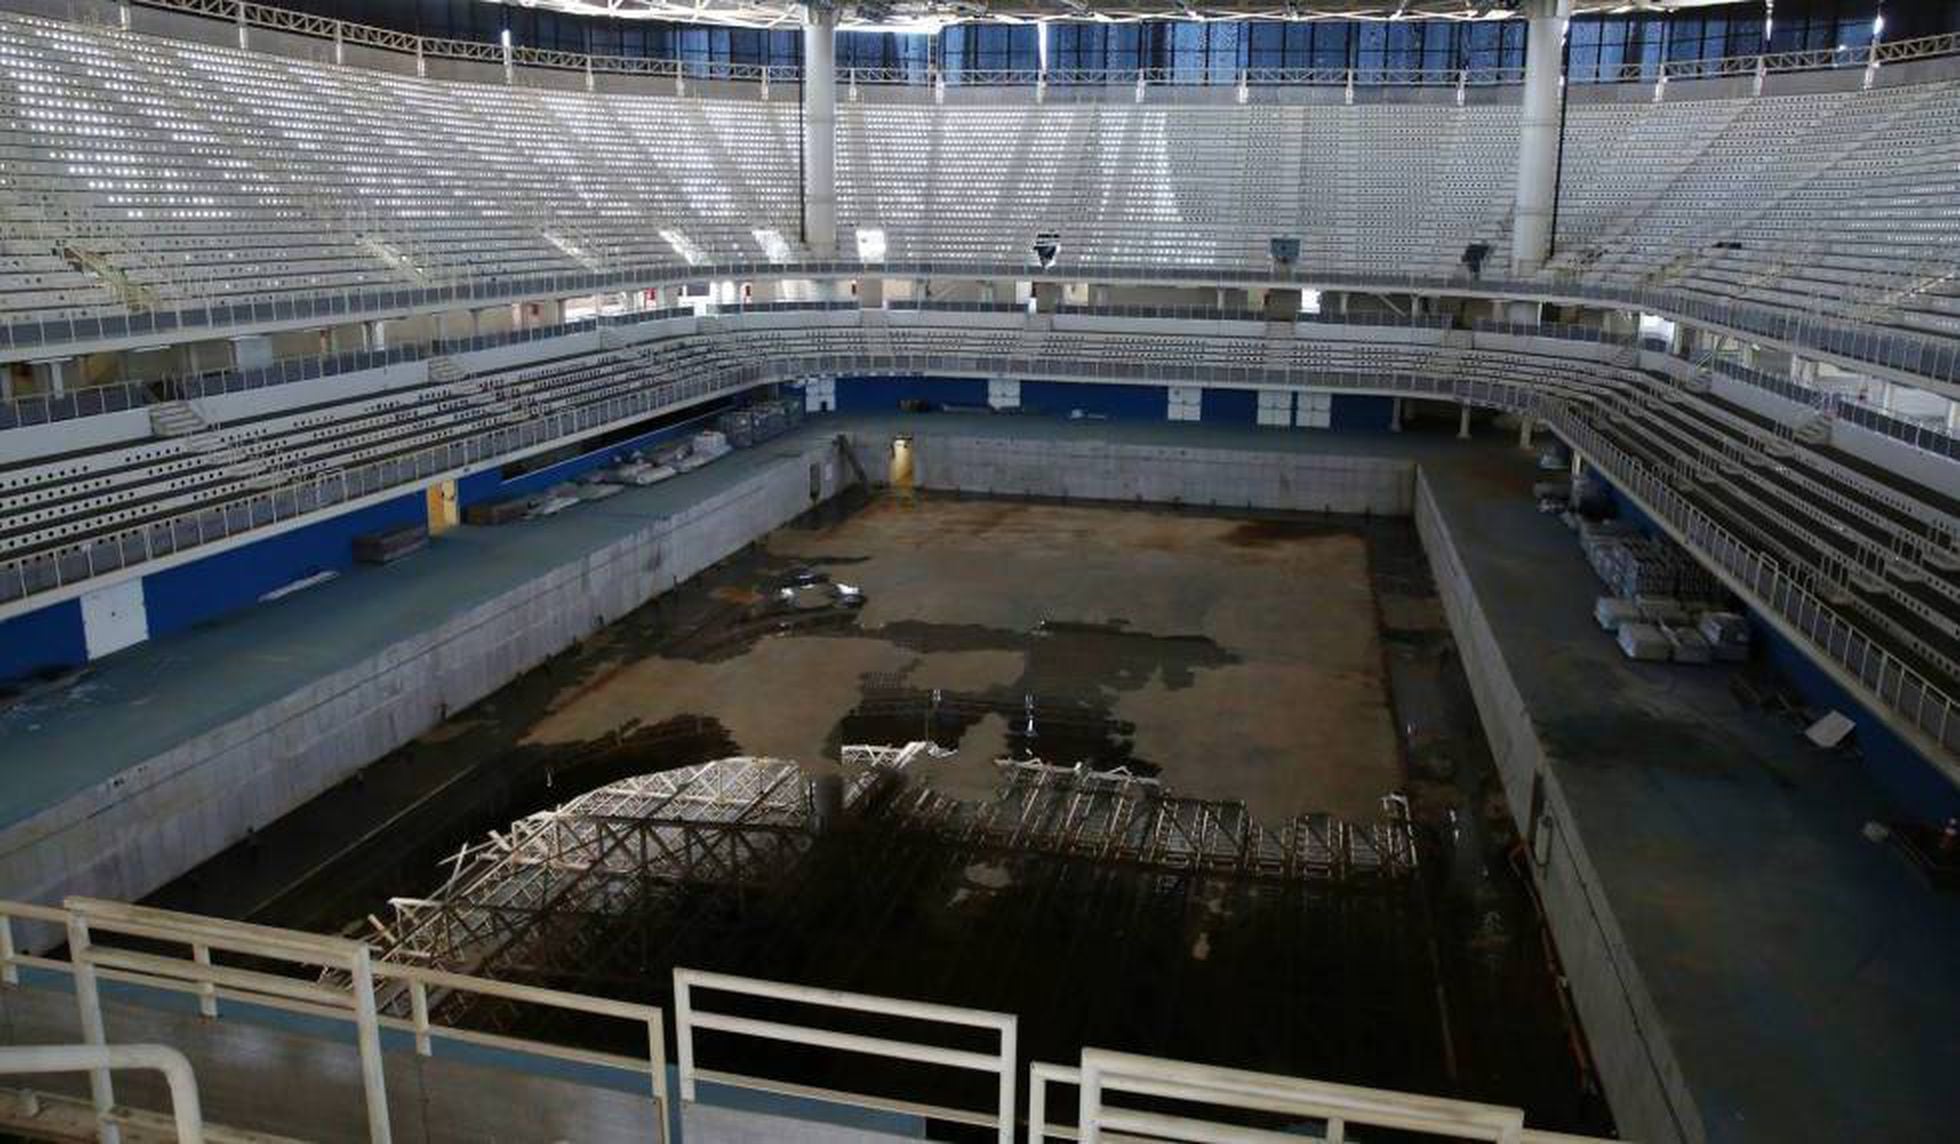 Legacy Of Olympic Games In Brazil From Olympic Pool To Mosquito Swamp The Rio 16 Debacle International El Pais English Edition